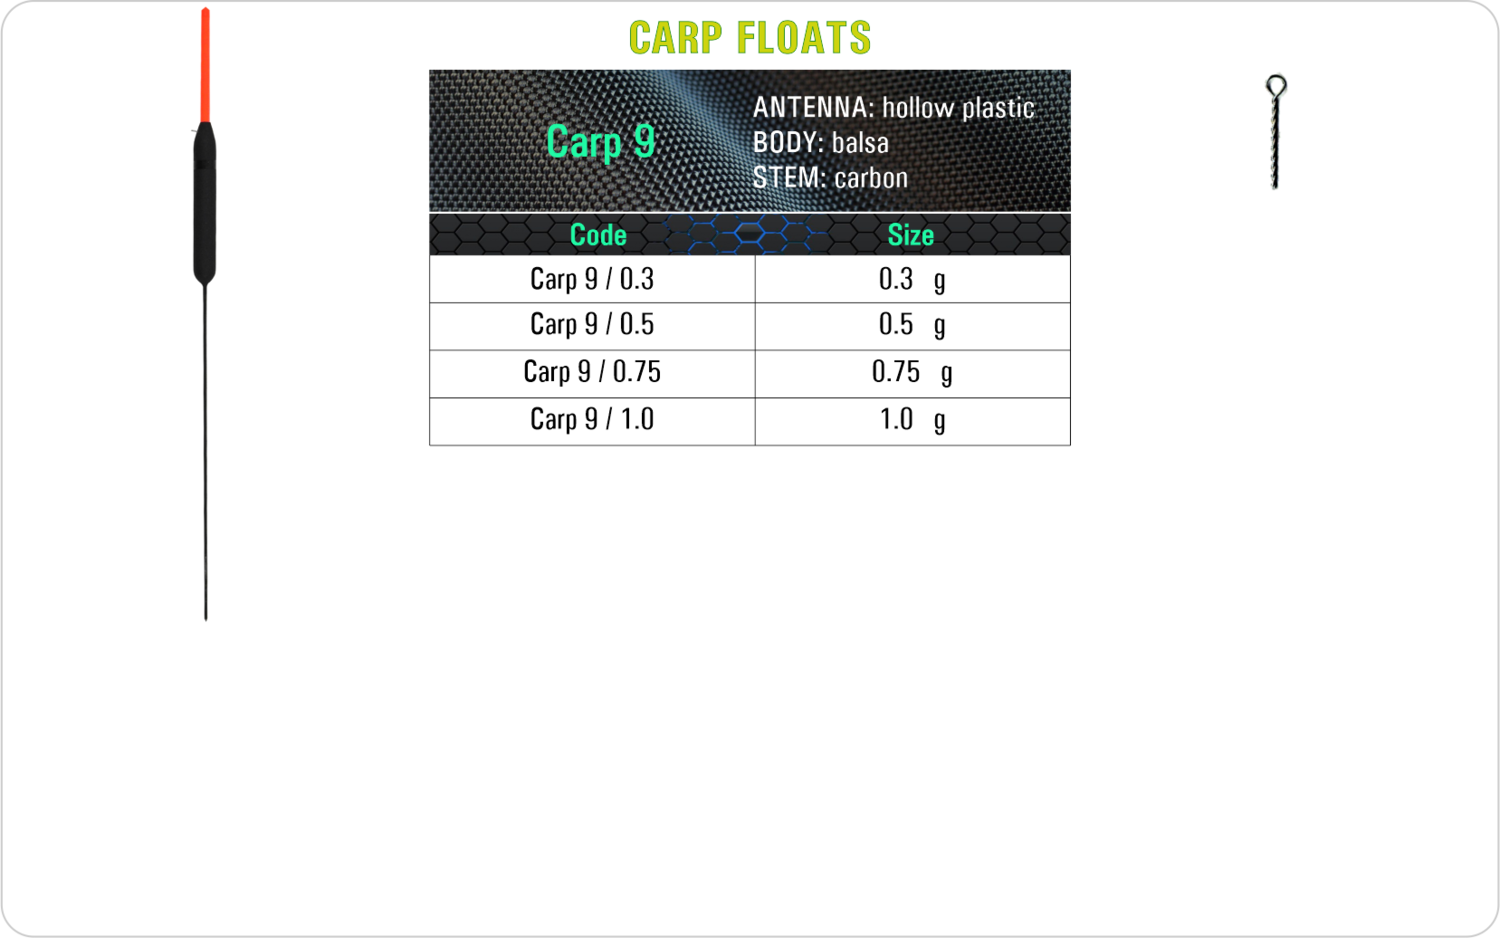 SF Carp 9 Carp float model and table containing an additional information about this float with different codes, sizes, types of the body, the stem and the antenna of the float.